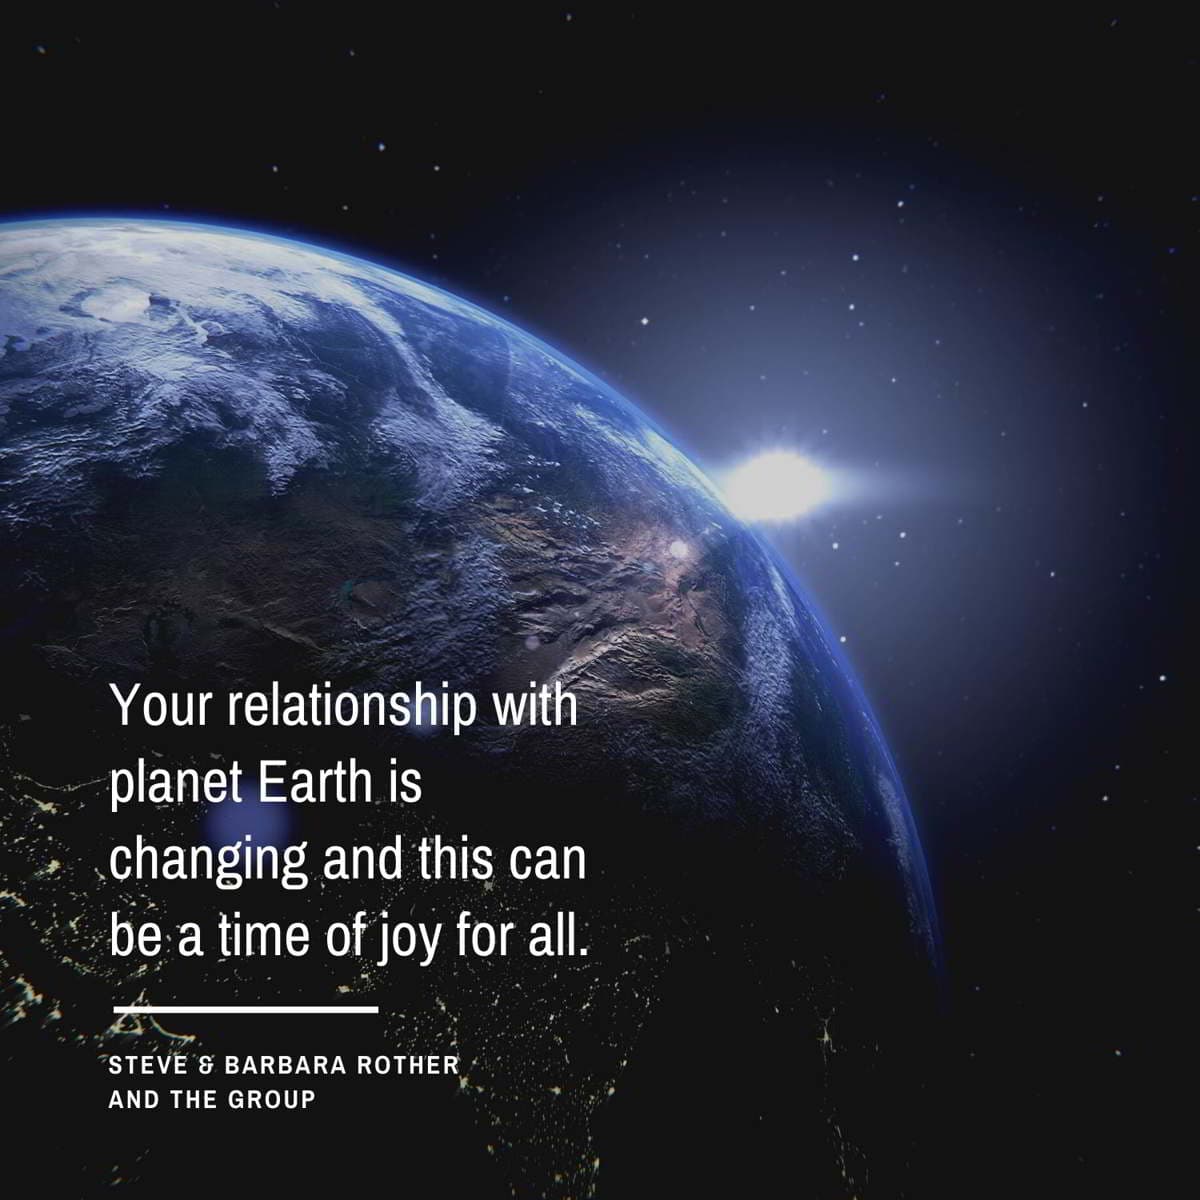 Earth quotes